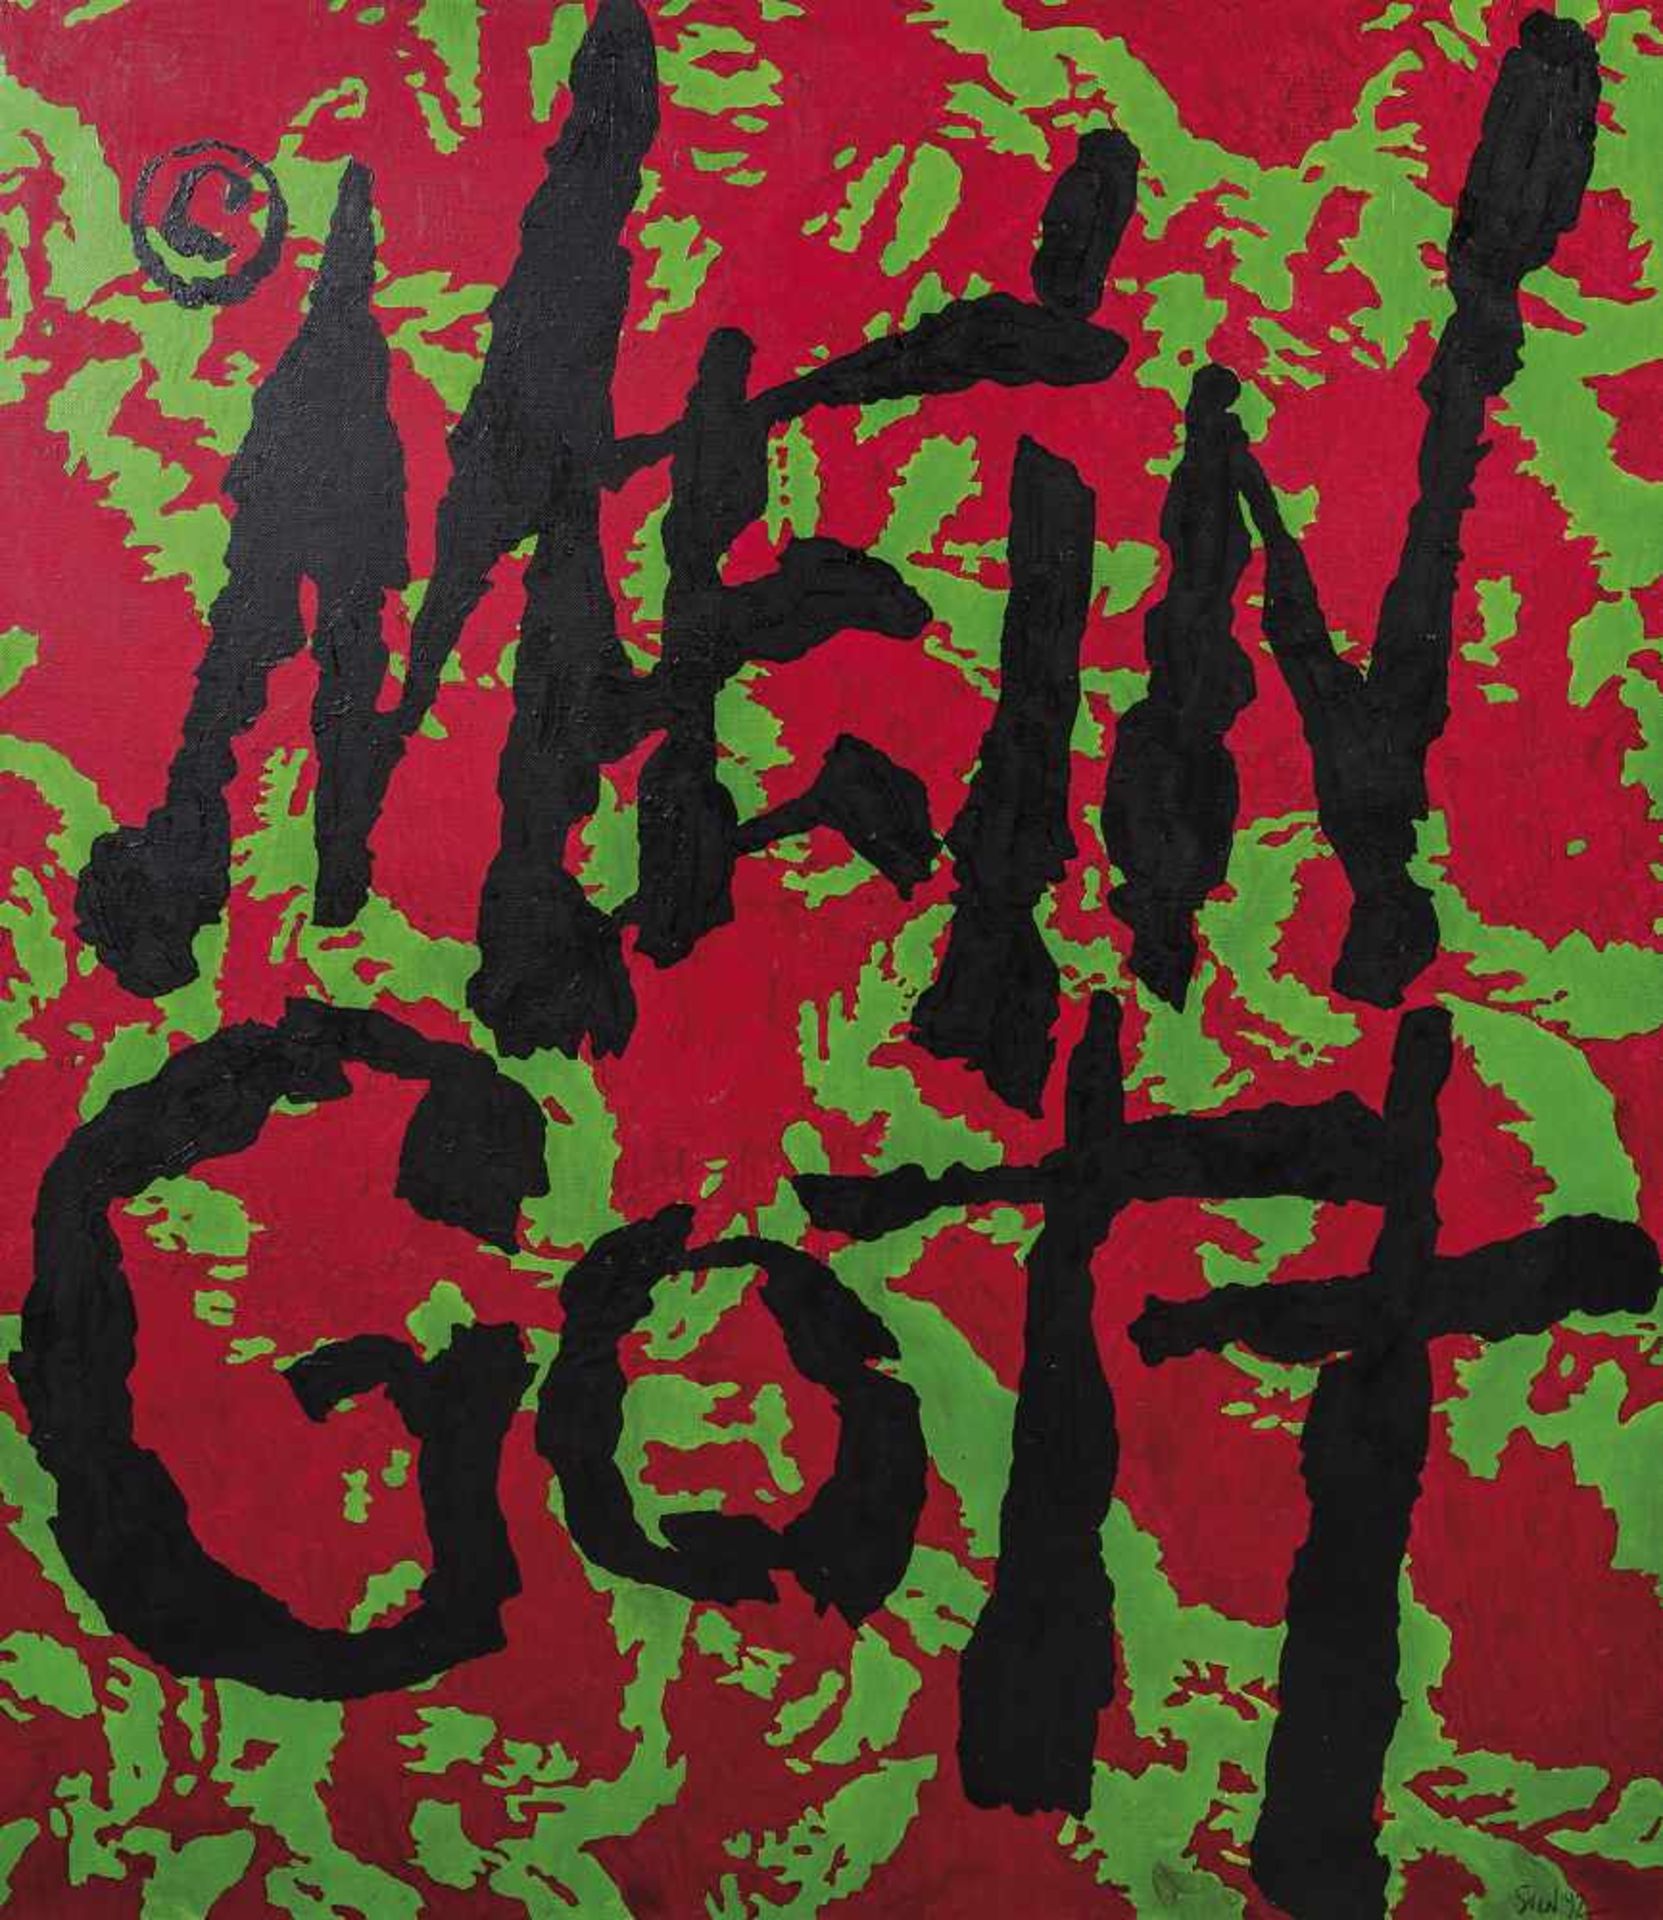 Sven Gundlakh (Russia, 1959). ''My God'' - inscribed in German. Oil on canvas. Signed lowerright